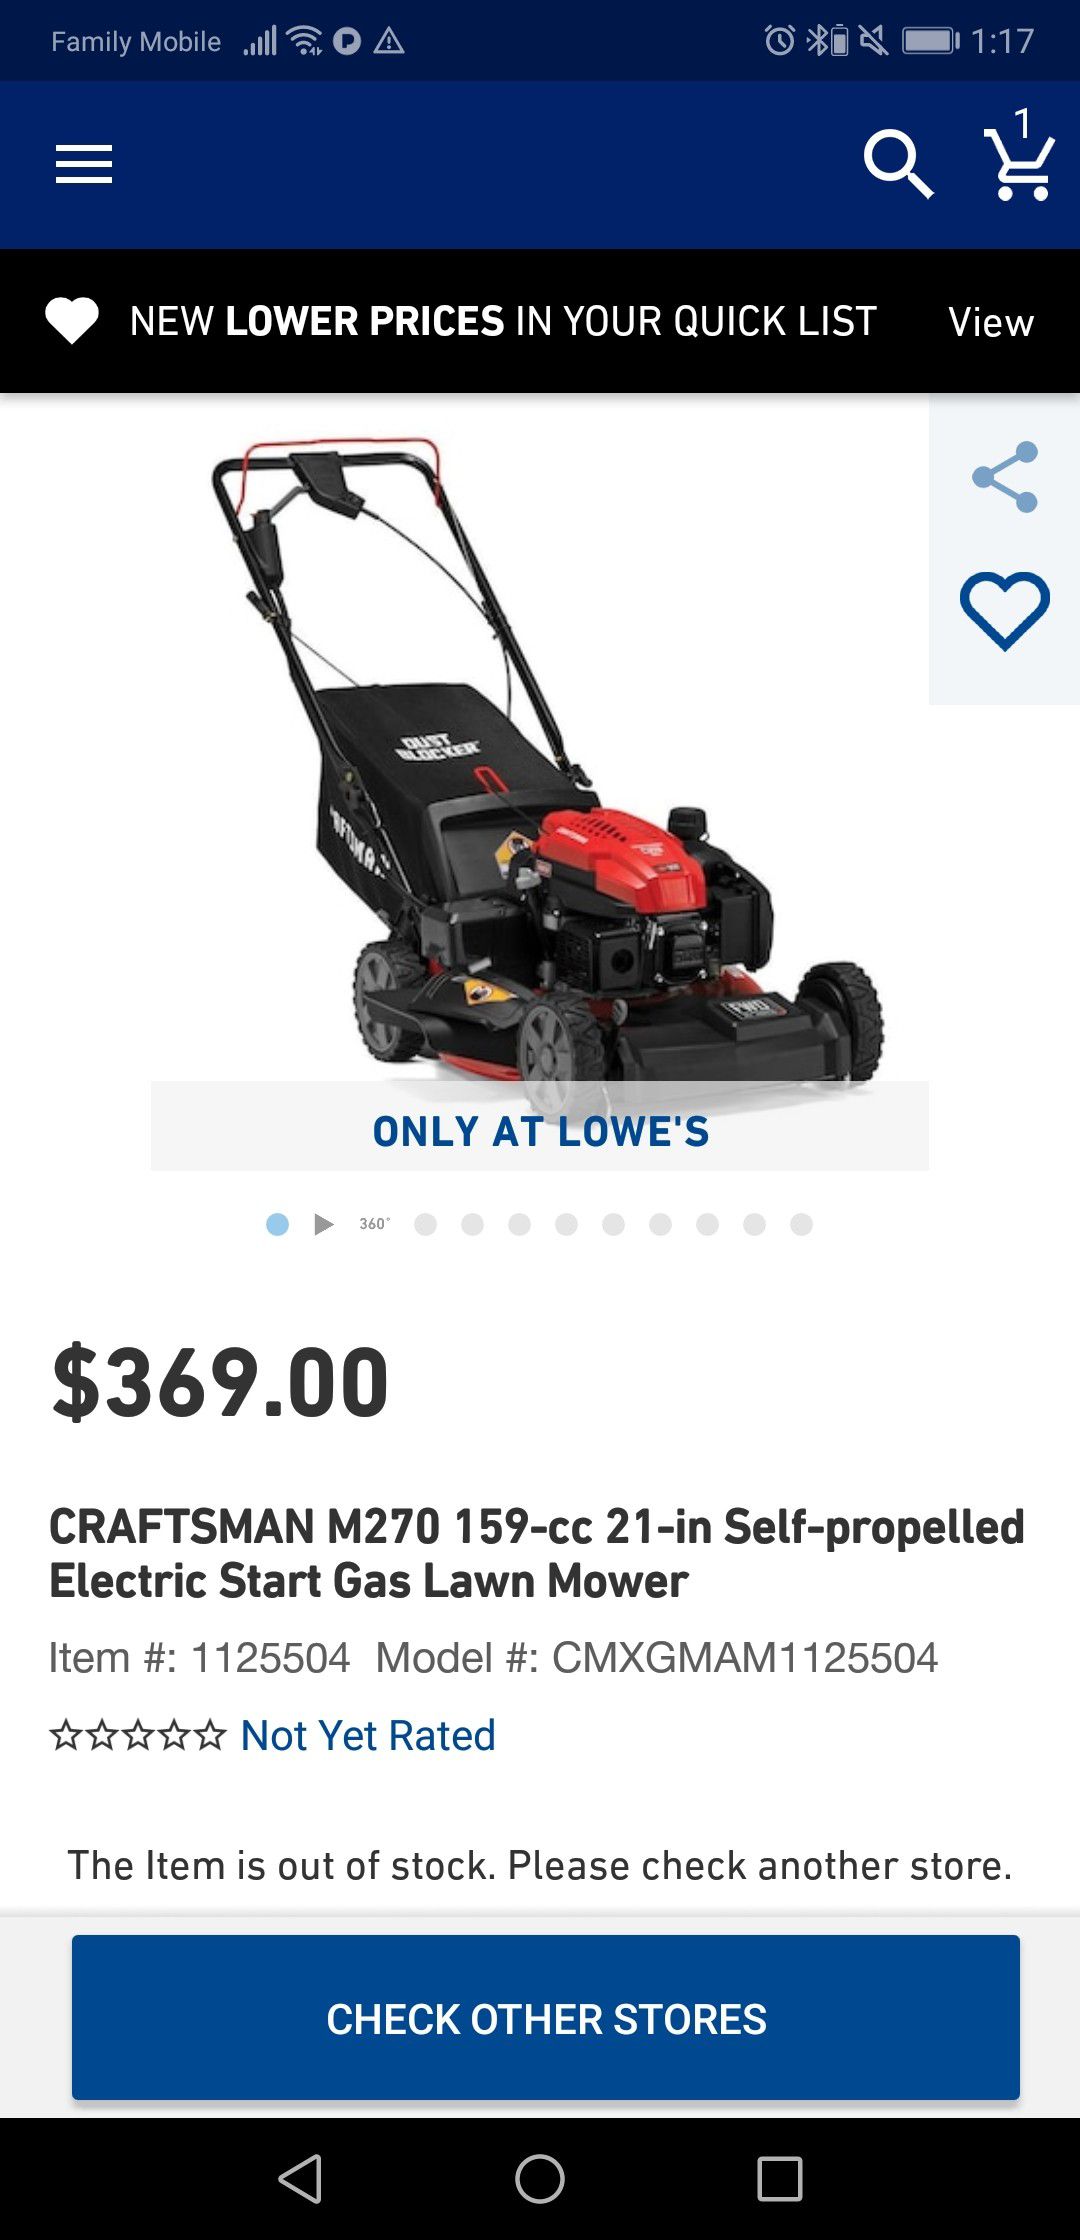 CRAFTSMAN M270 159-cc 21-in Self-propelled Electric Start Gas Lawn Mower